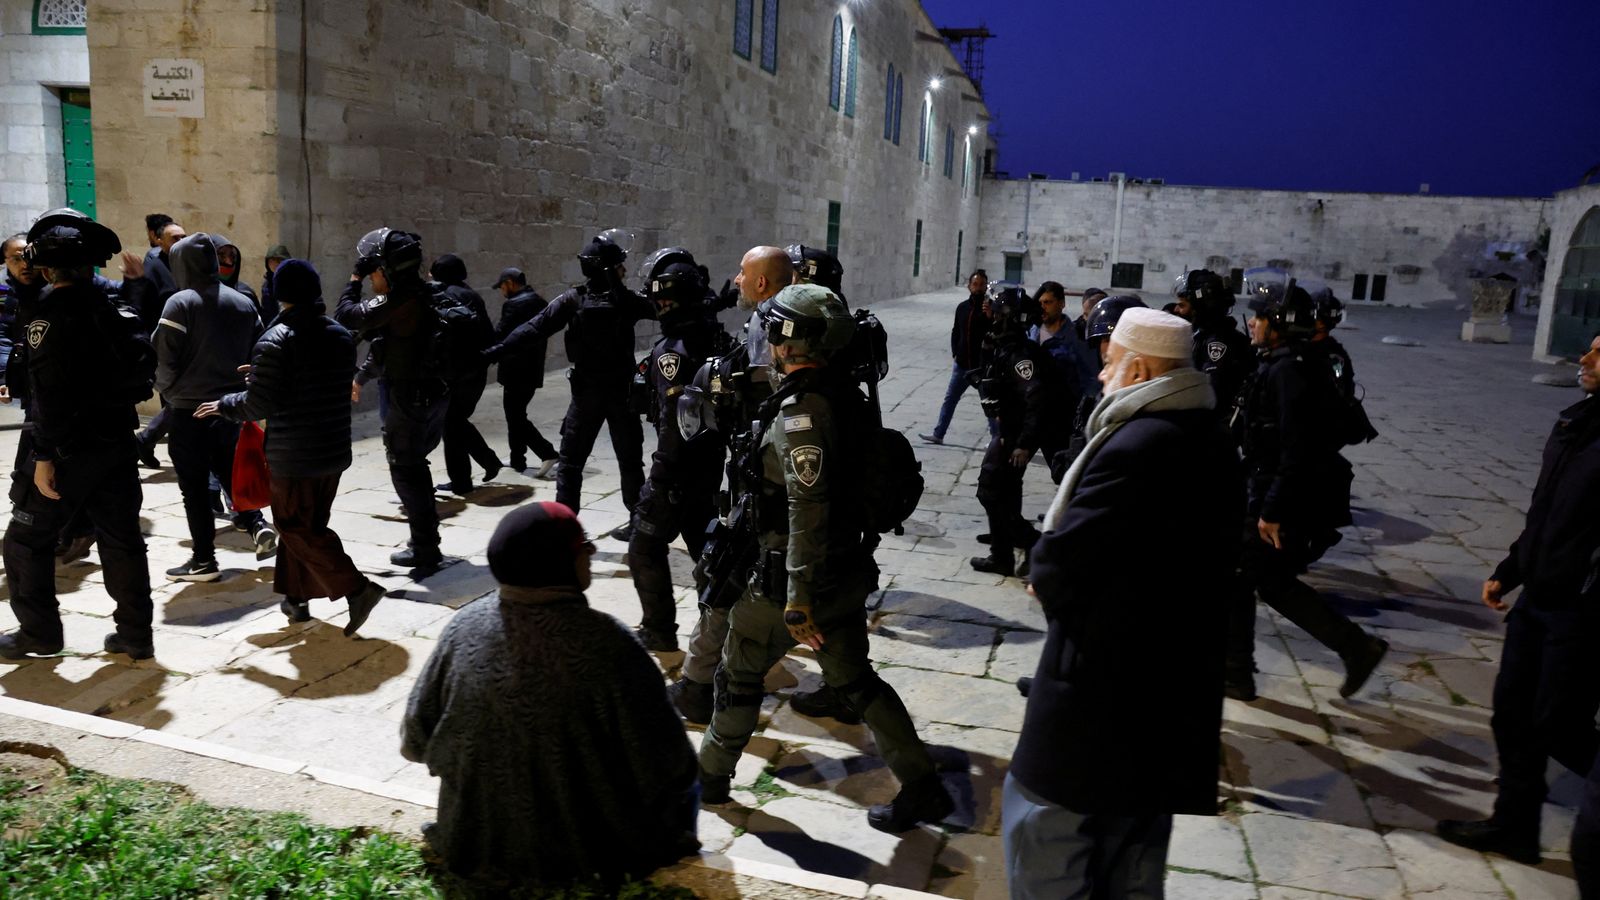 Israeli riot police fire stun grenades and tear gas inside Al Aqsa mosque in clashes with Palestinian worshippers